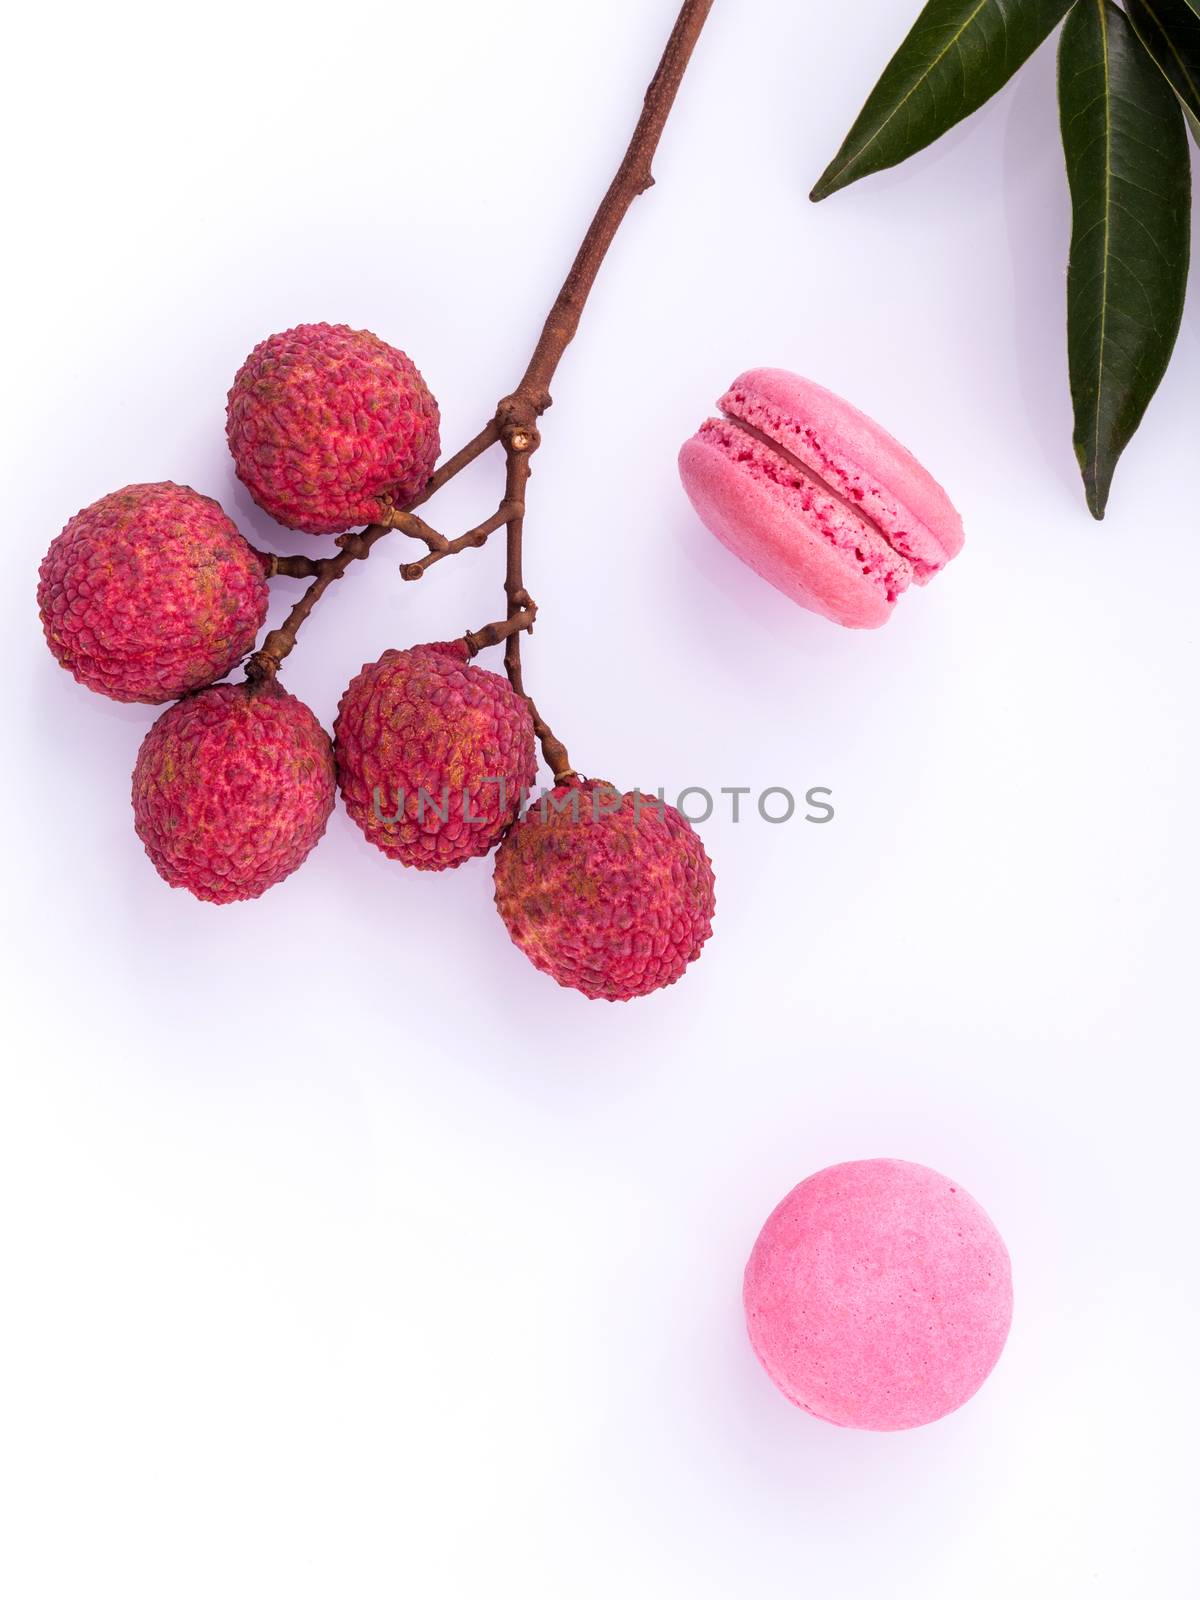 Brunch of ripe lychee and lychee macaroons with leaf isolate on  by kerdkanno